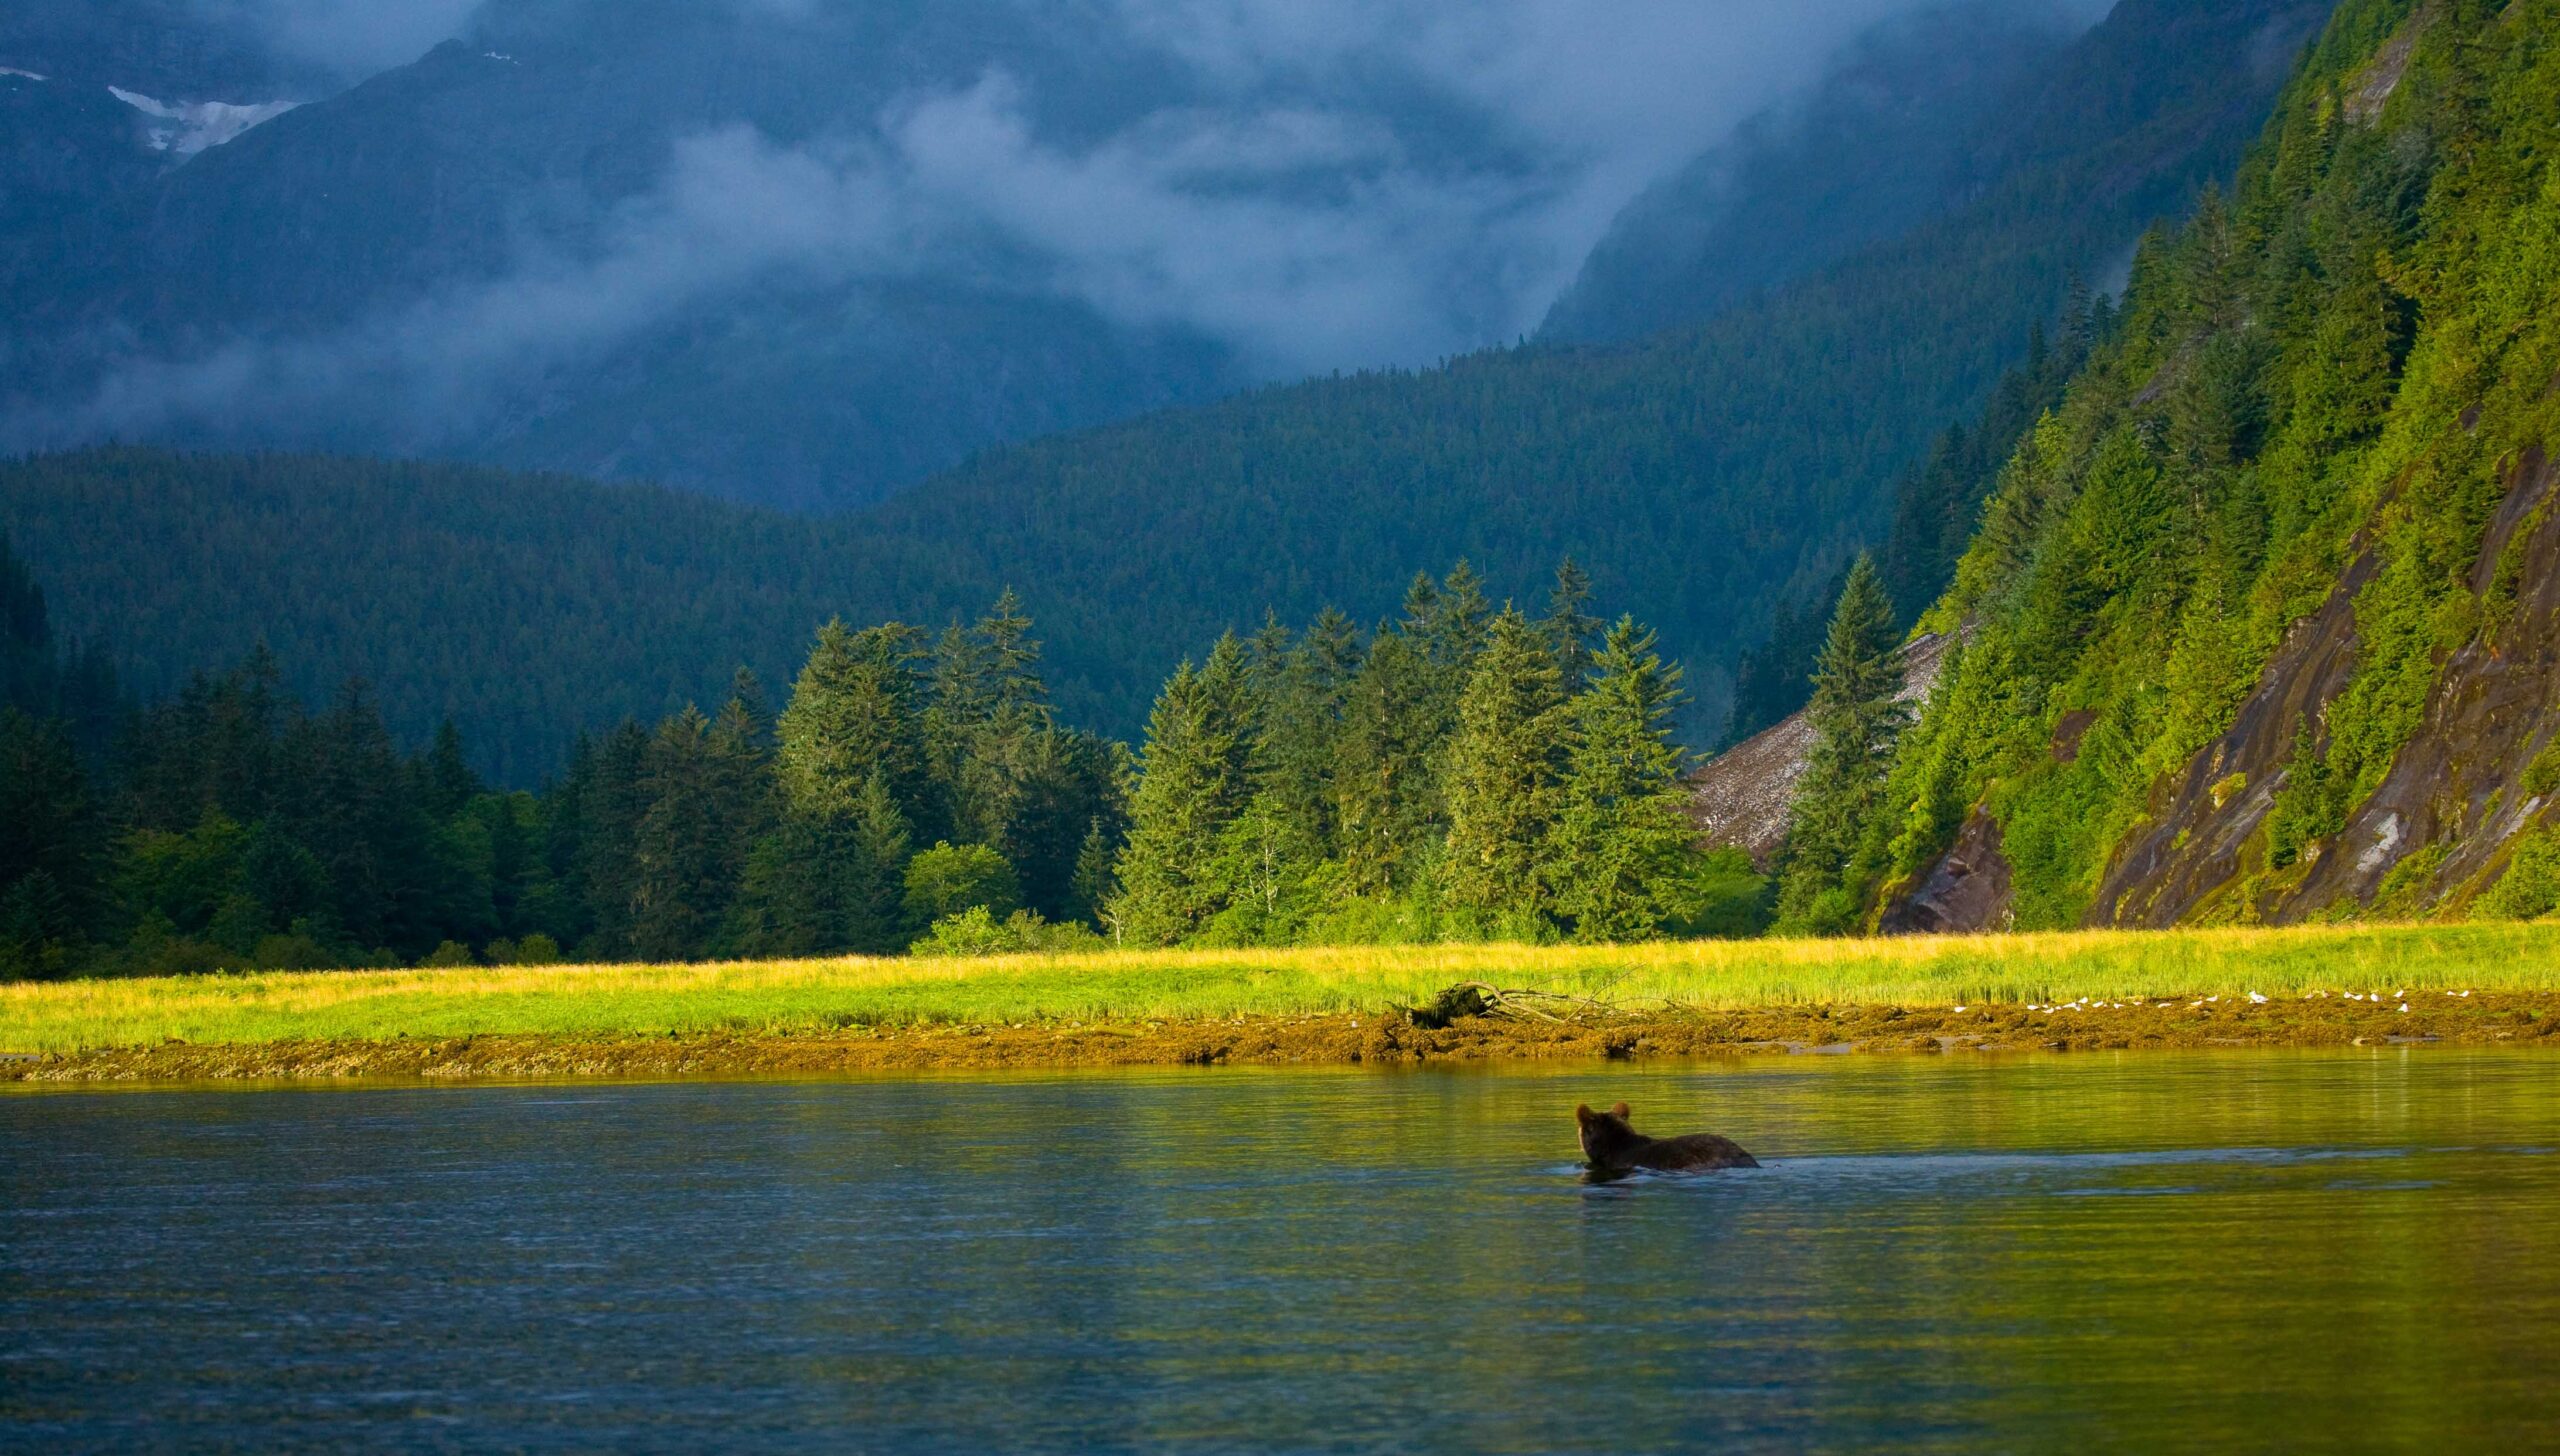 A bear is swimming in a river near a mountain.